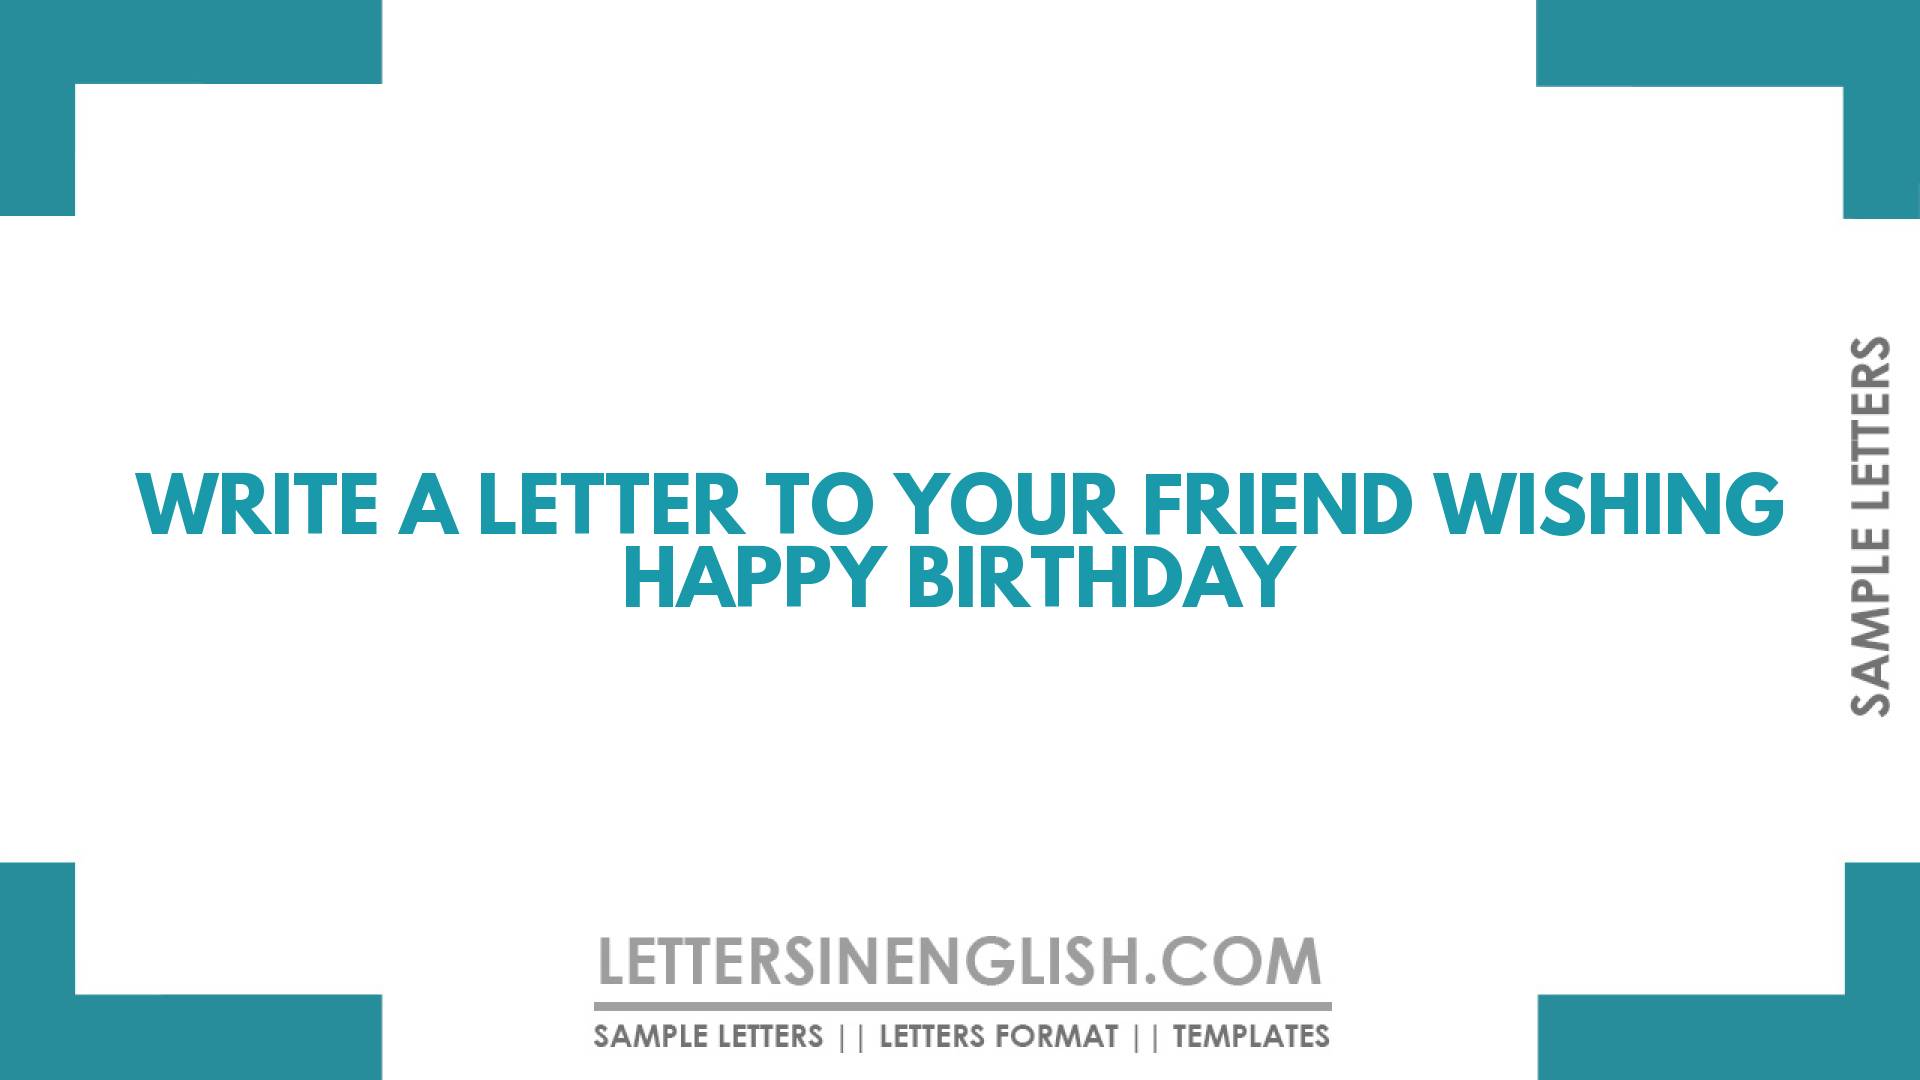 Write a Letter to Your Friend Wishing Happy Birthday